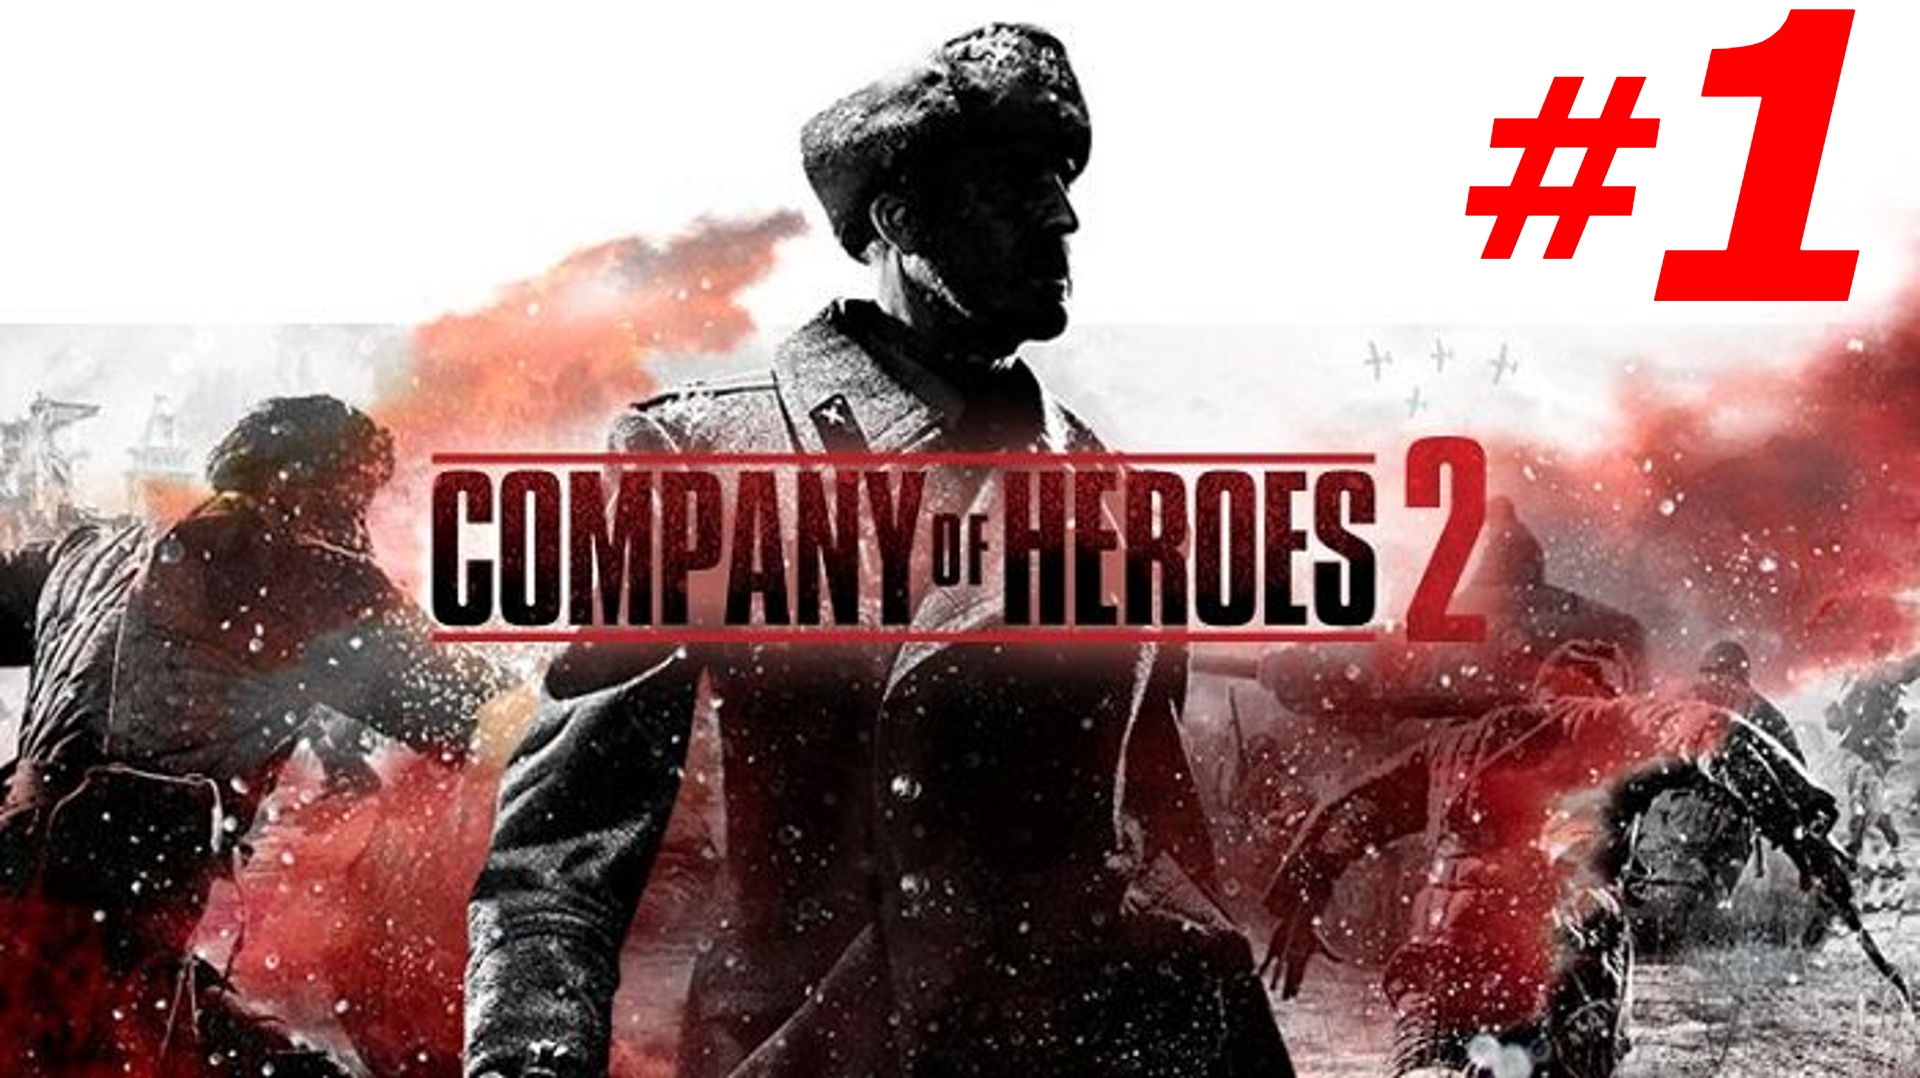 Company of heroes maps for steam фото 55